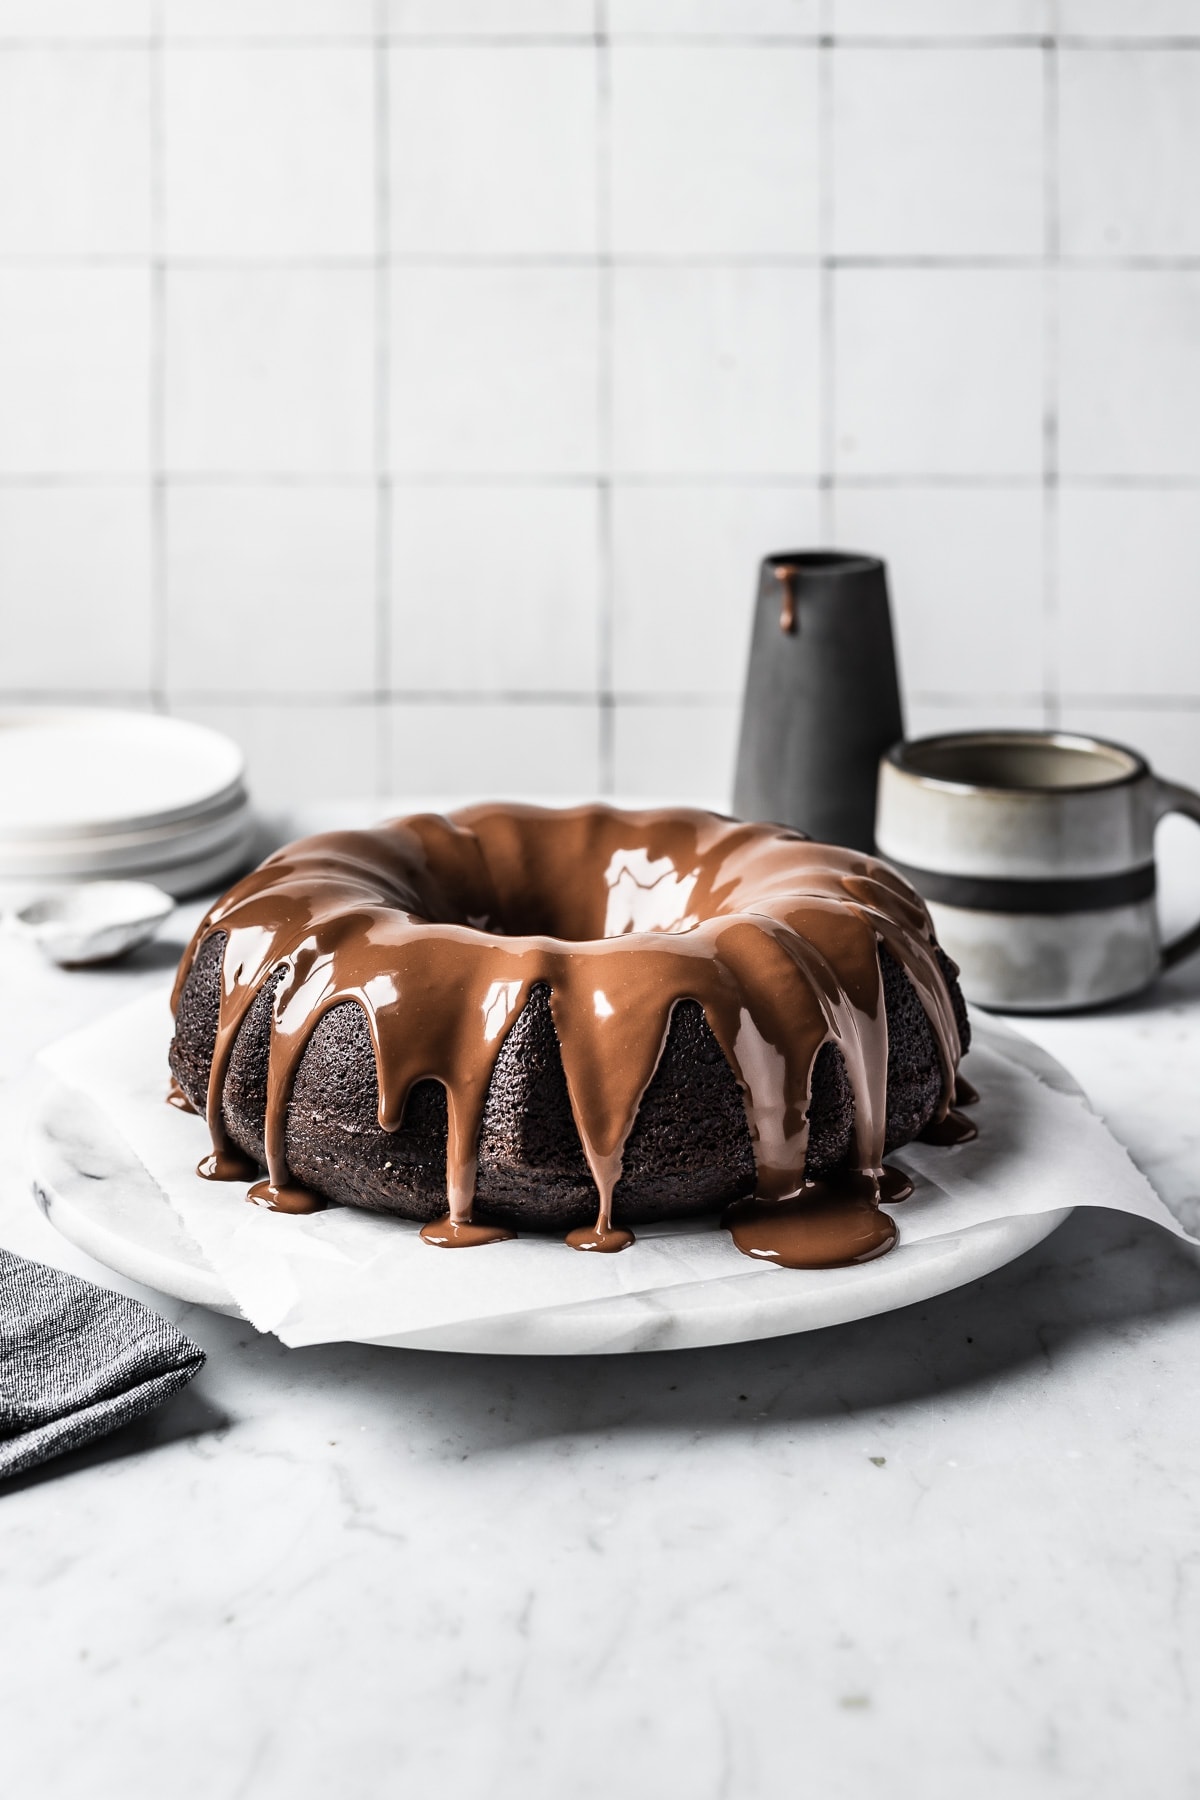 A chocolate cake drizzled with a chocolate ganache on a marble platter and marble countertop